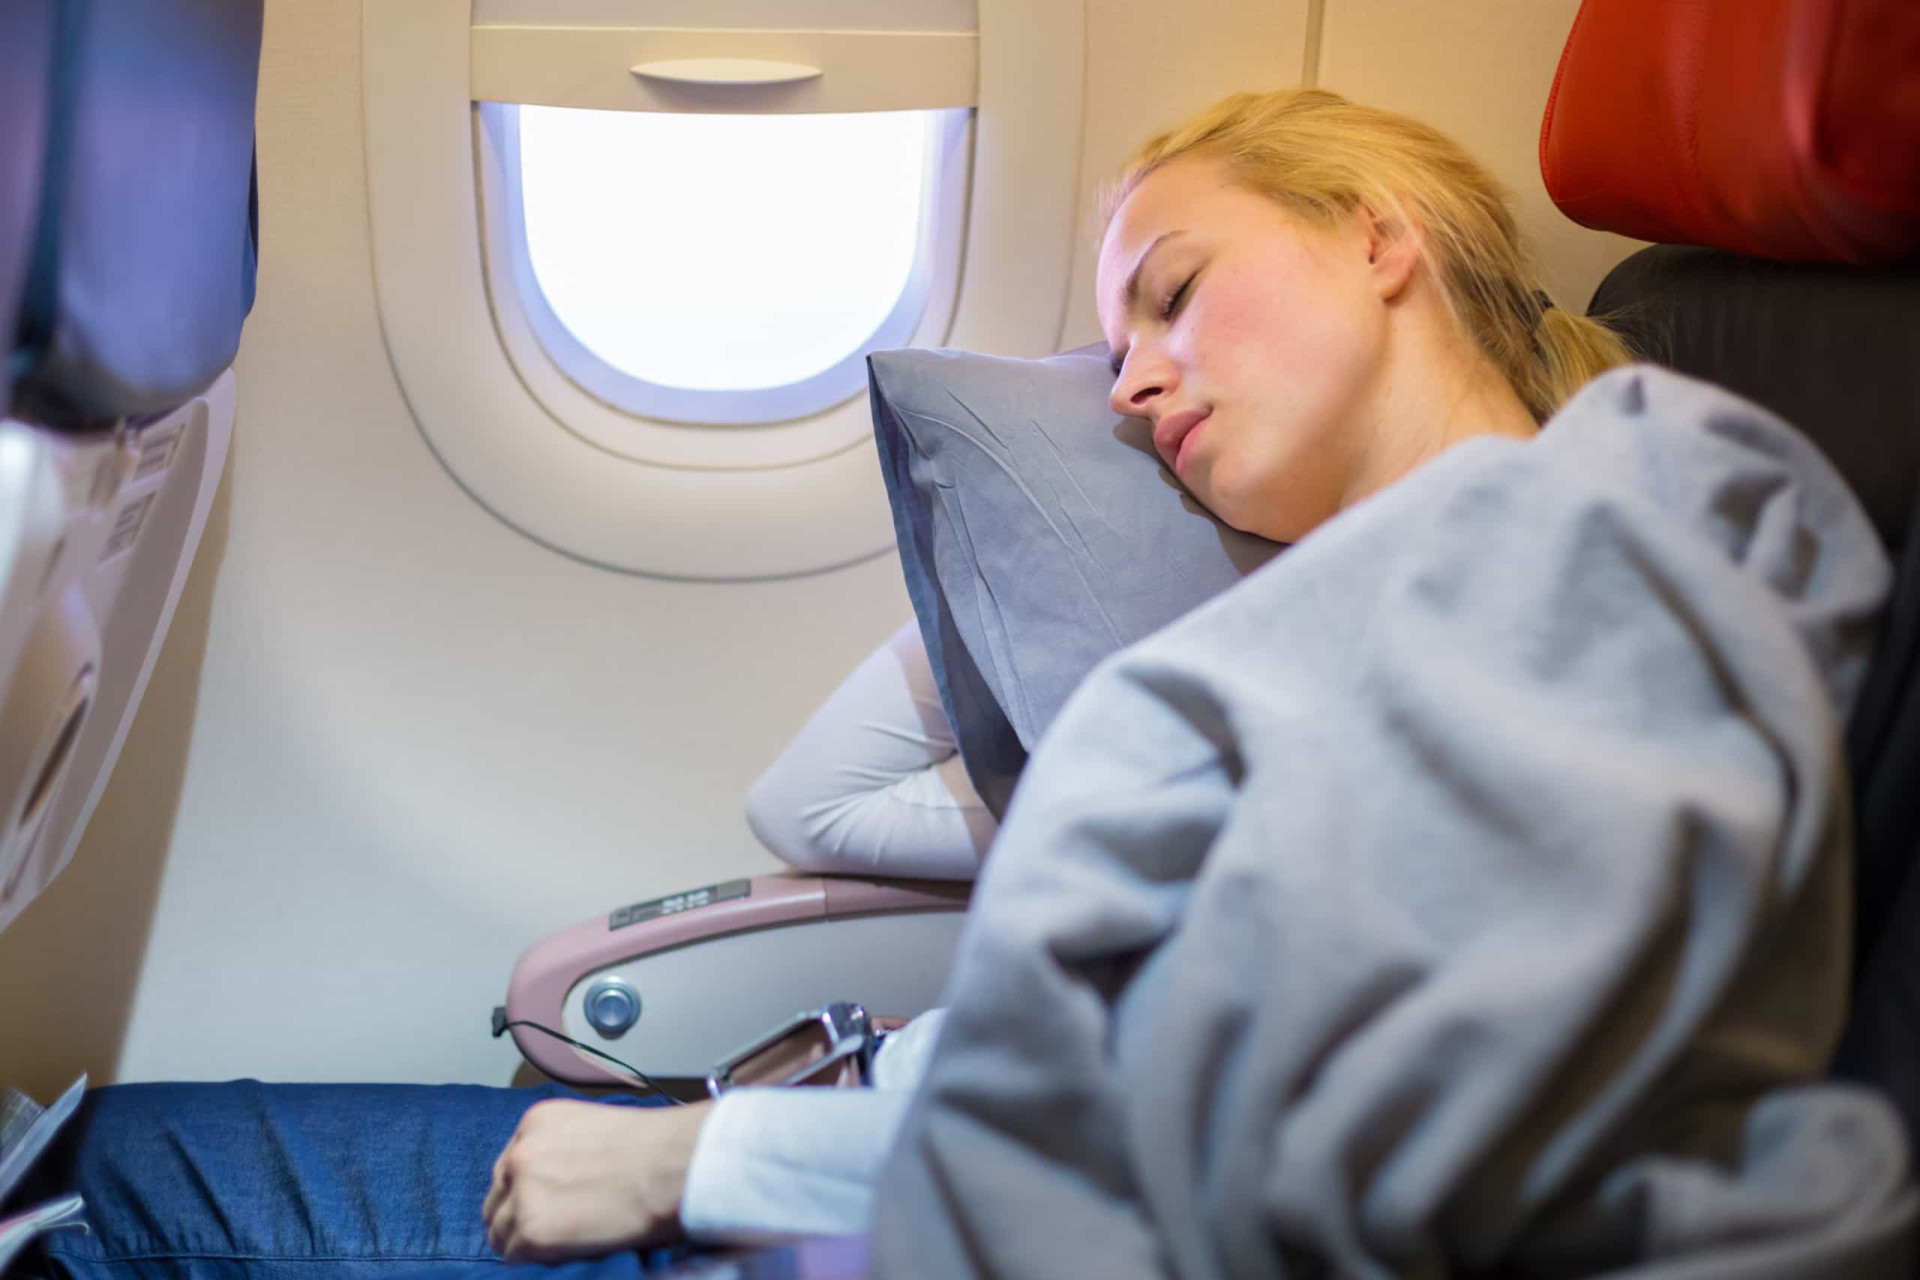 <p>It's not always easy when you're in a crowded plane, but get some sleep, even if it’s a short nap. For extra comfort, get a blanket and pillow.</p><p><a href="https://www.msn.com/en-us/community/channel/vid-7xx8mnucu55yw63we9va2gwr7uihbxwc68fxqp25x6tg4ftibpra?cvid=94631541bc0f4f89bfd59158d696ad7e">Follow us and access great exclusive content every day</a></p>